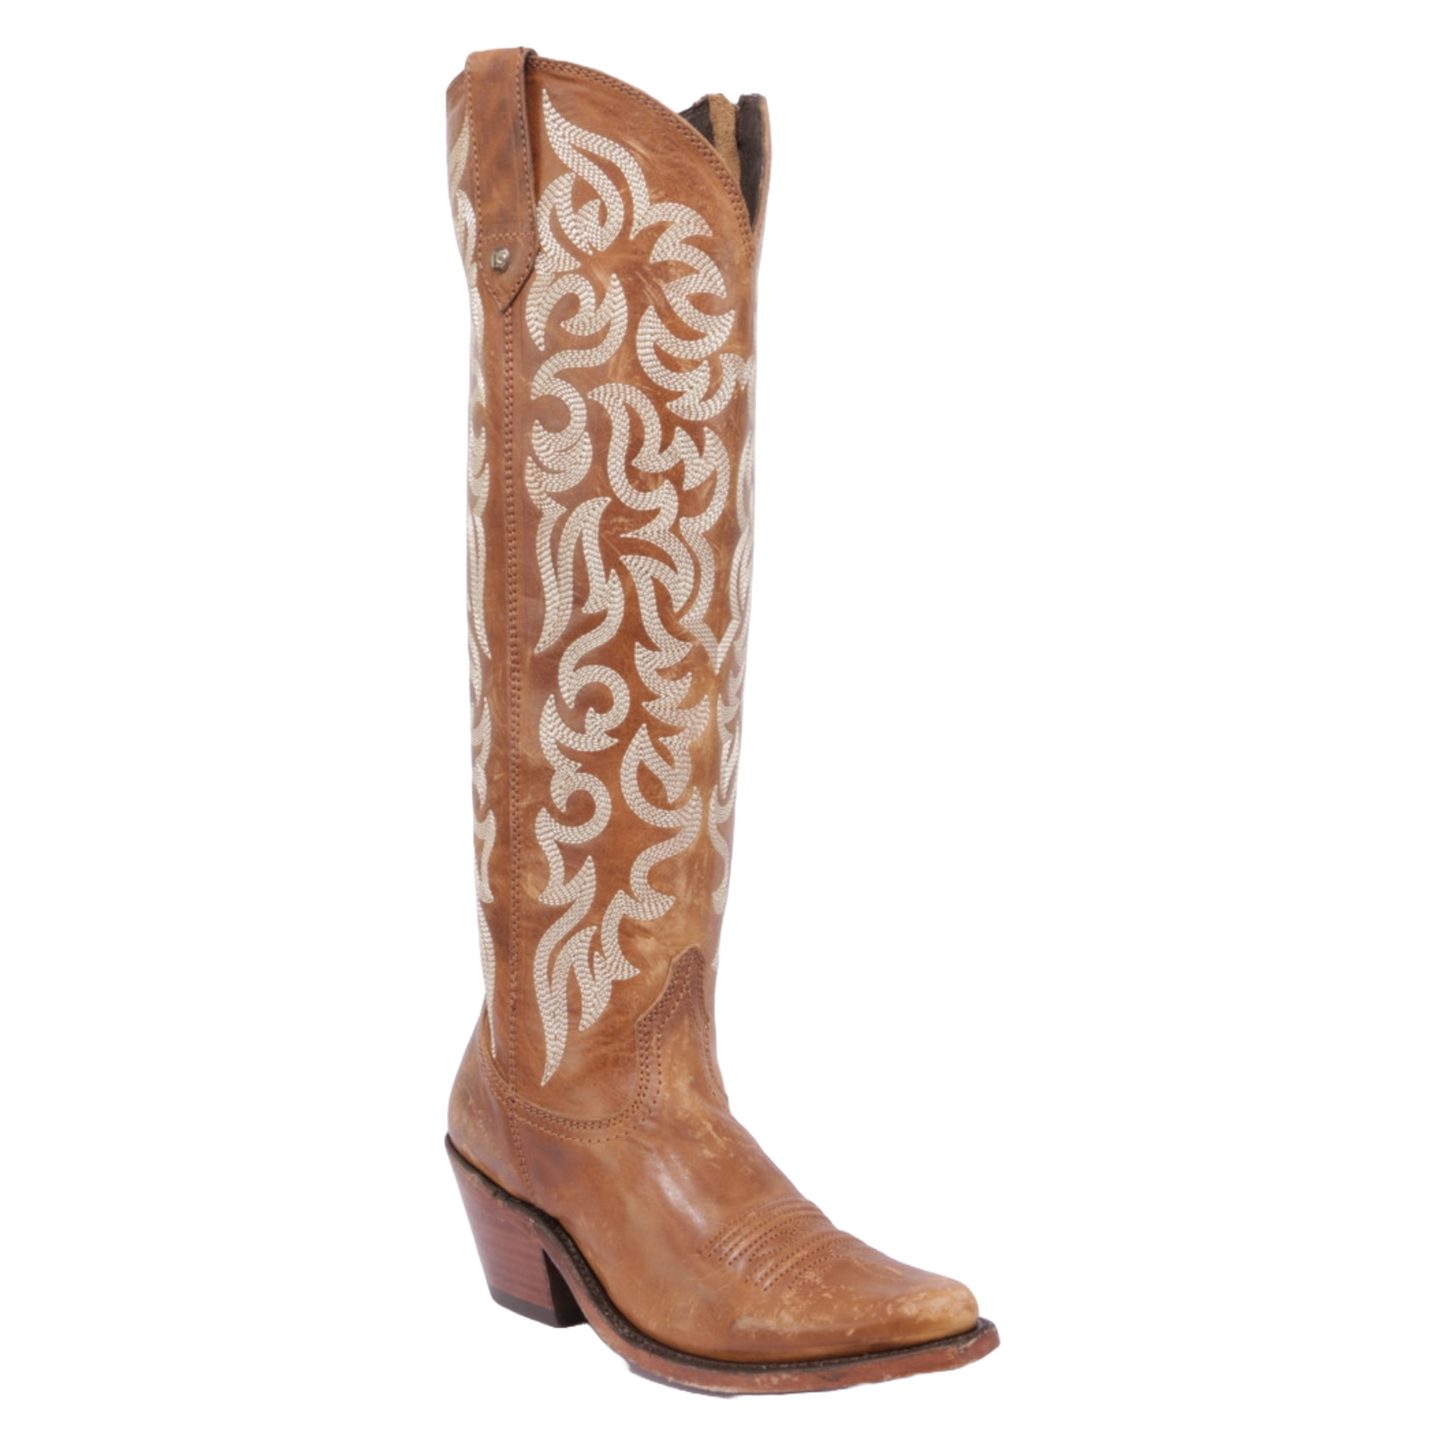 Liberty Black Ladies Embroidered Allie Mossil Tan Western Boots LB-712988